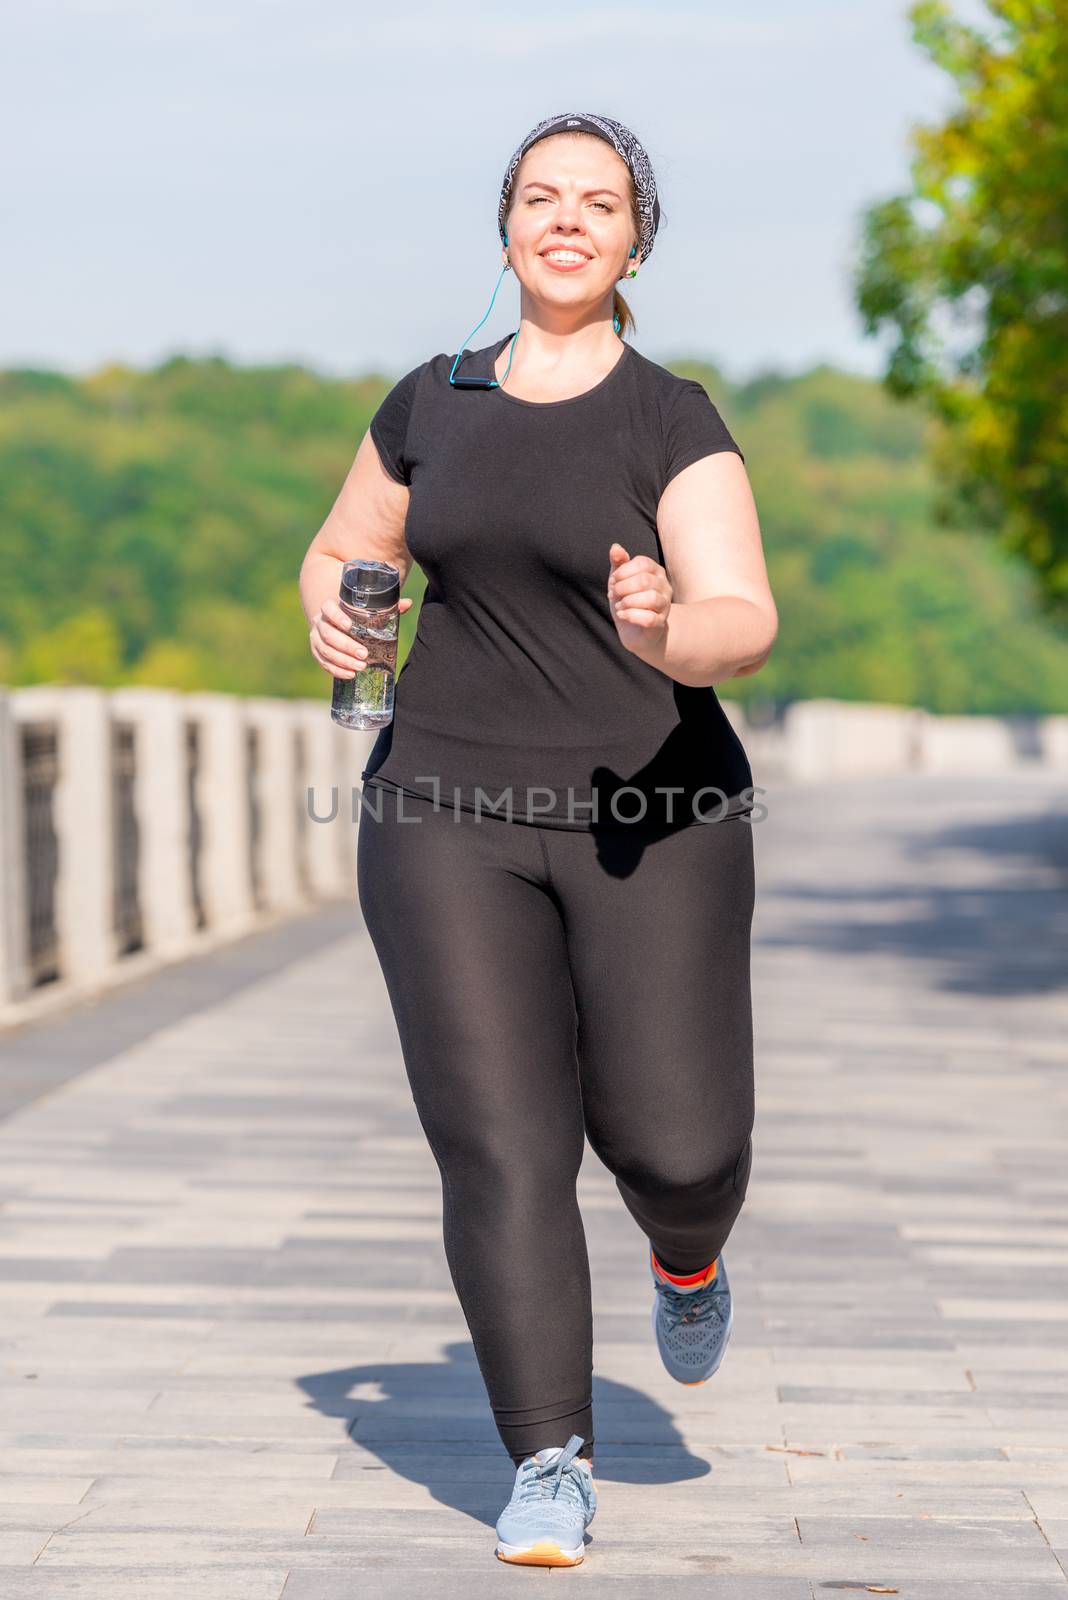 plus size woman with a bottle of water during her morning jog in a city park